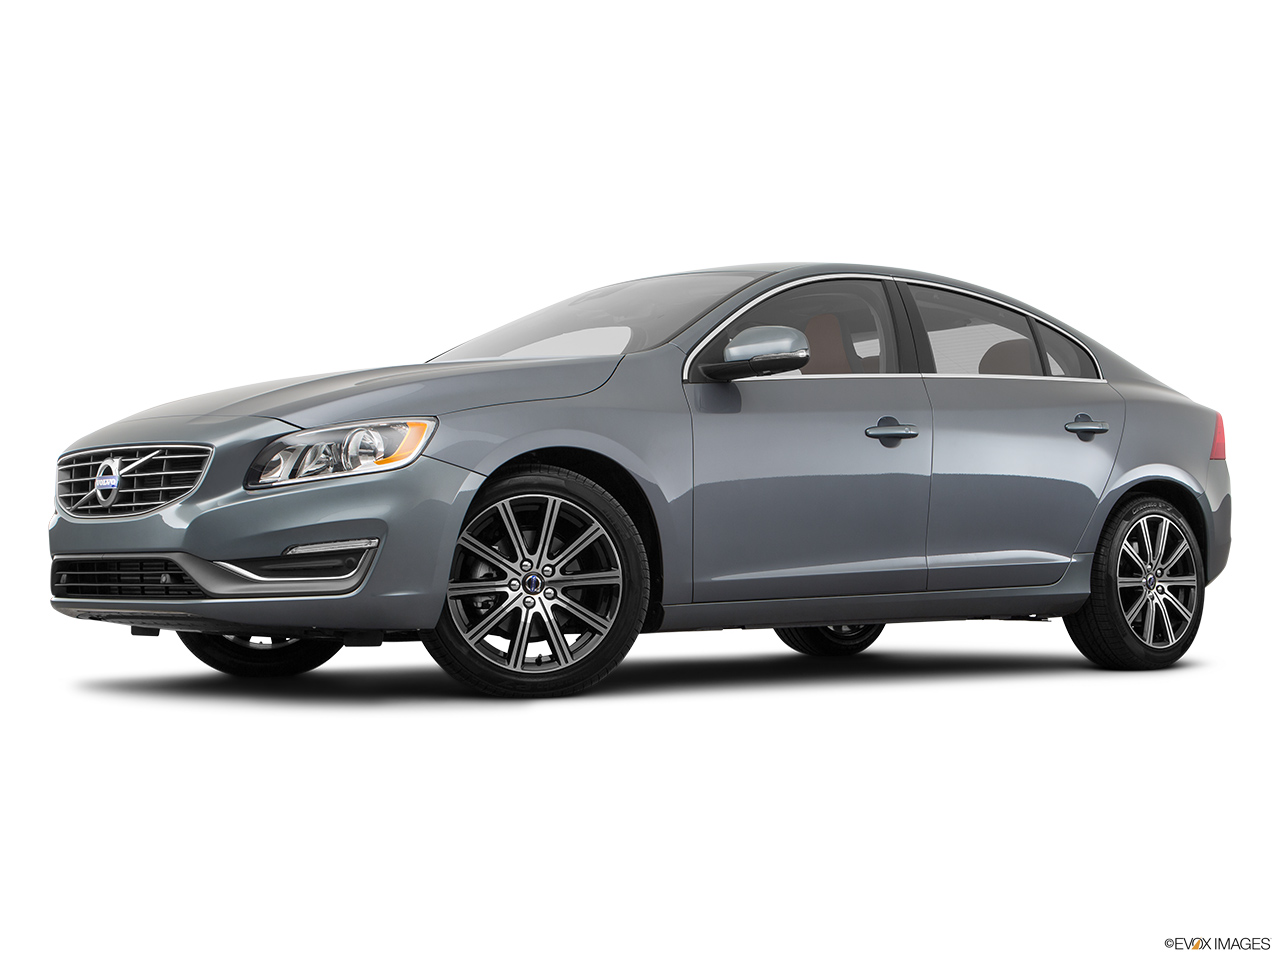 2018 Volvo S60 T5 Inscription Low/wide front 5/8. 